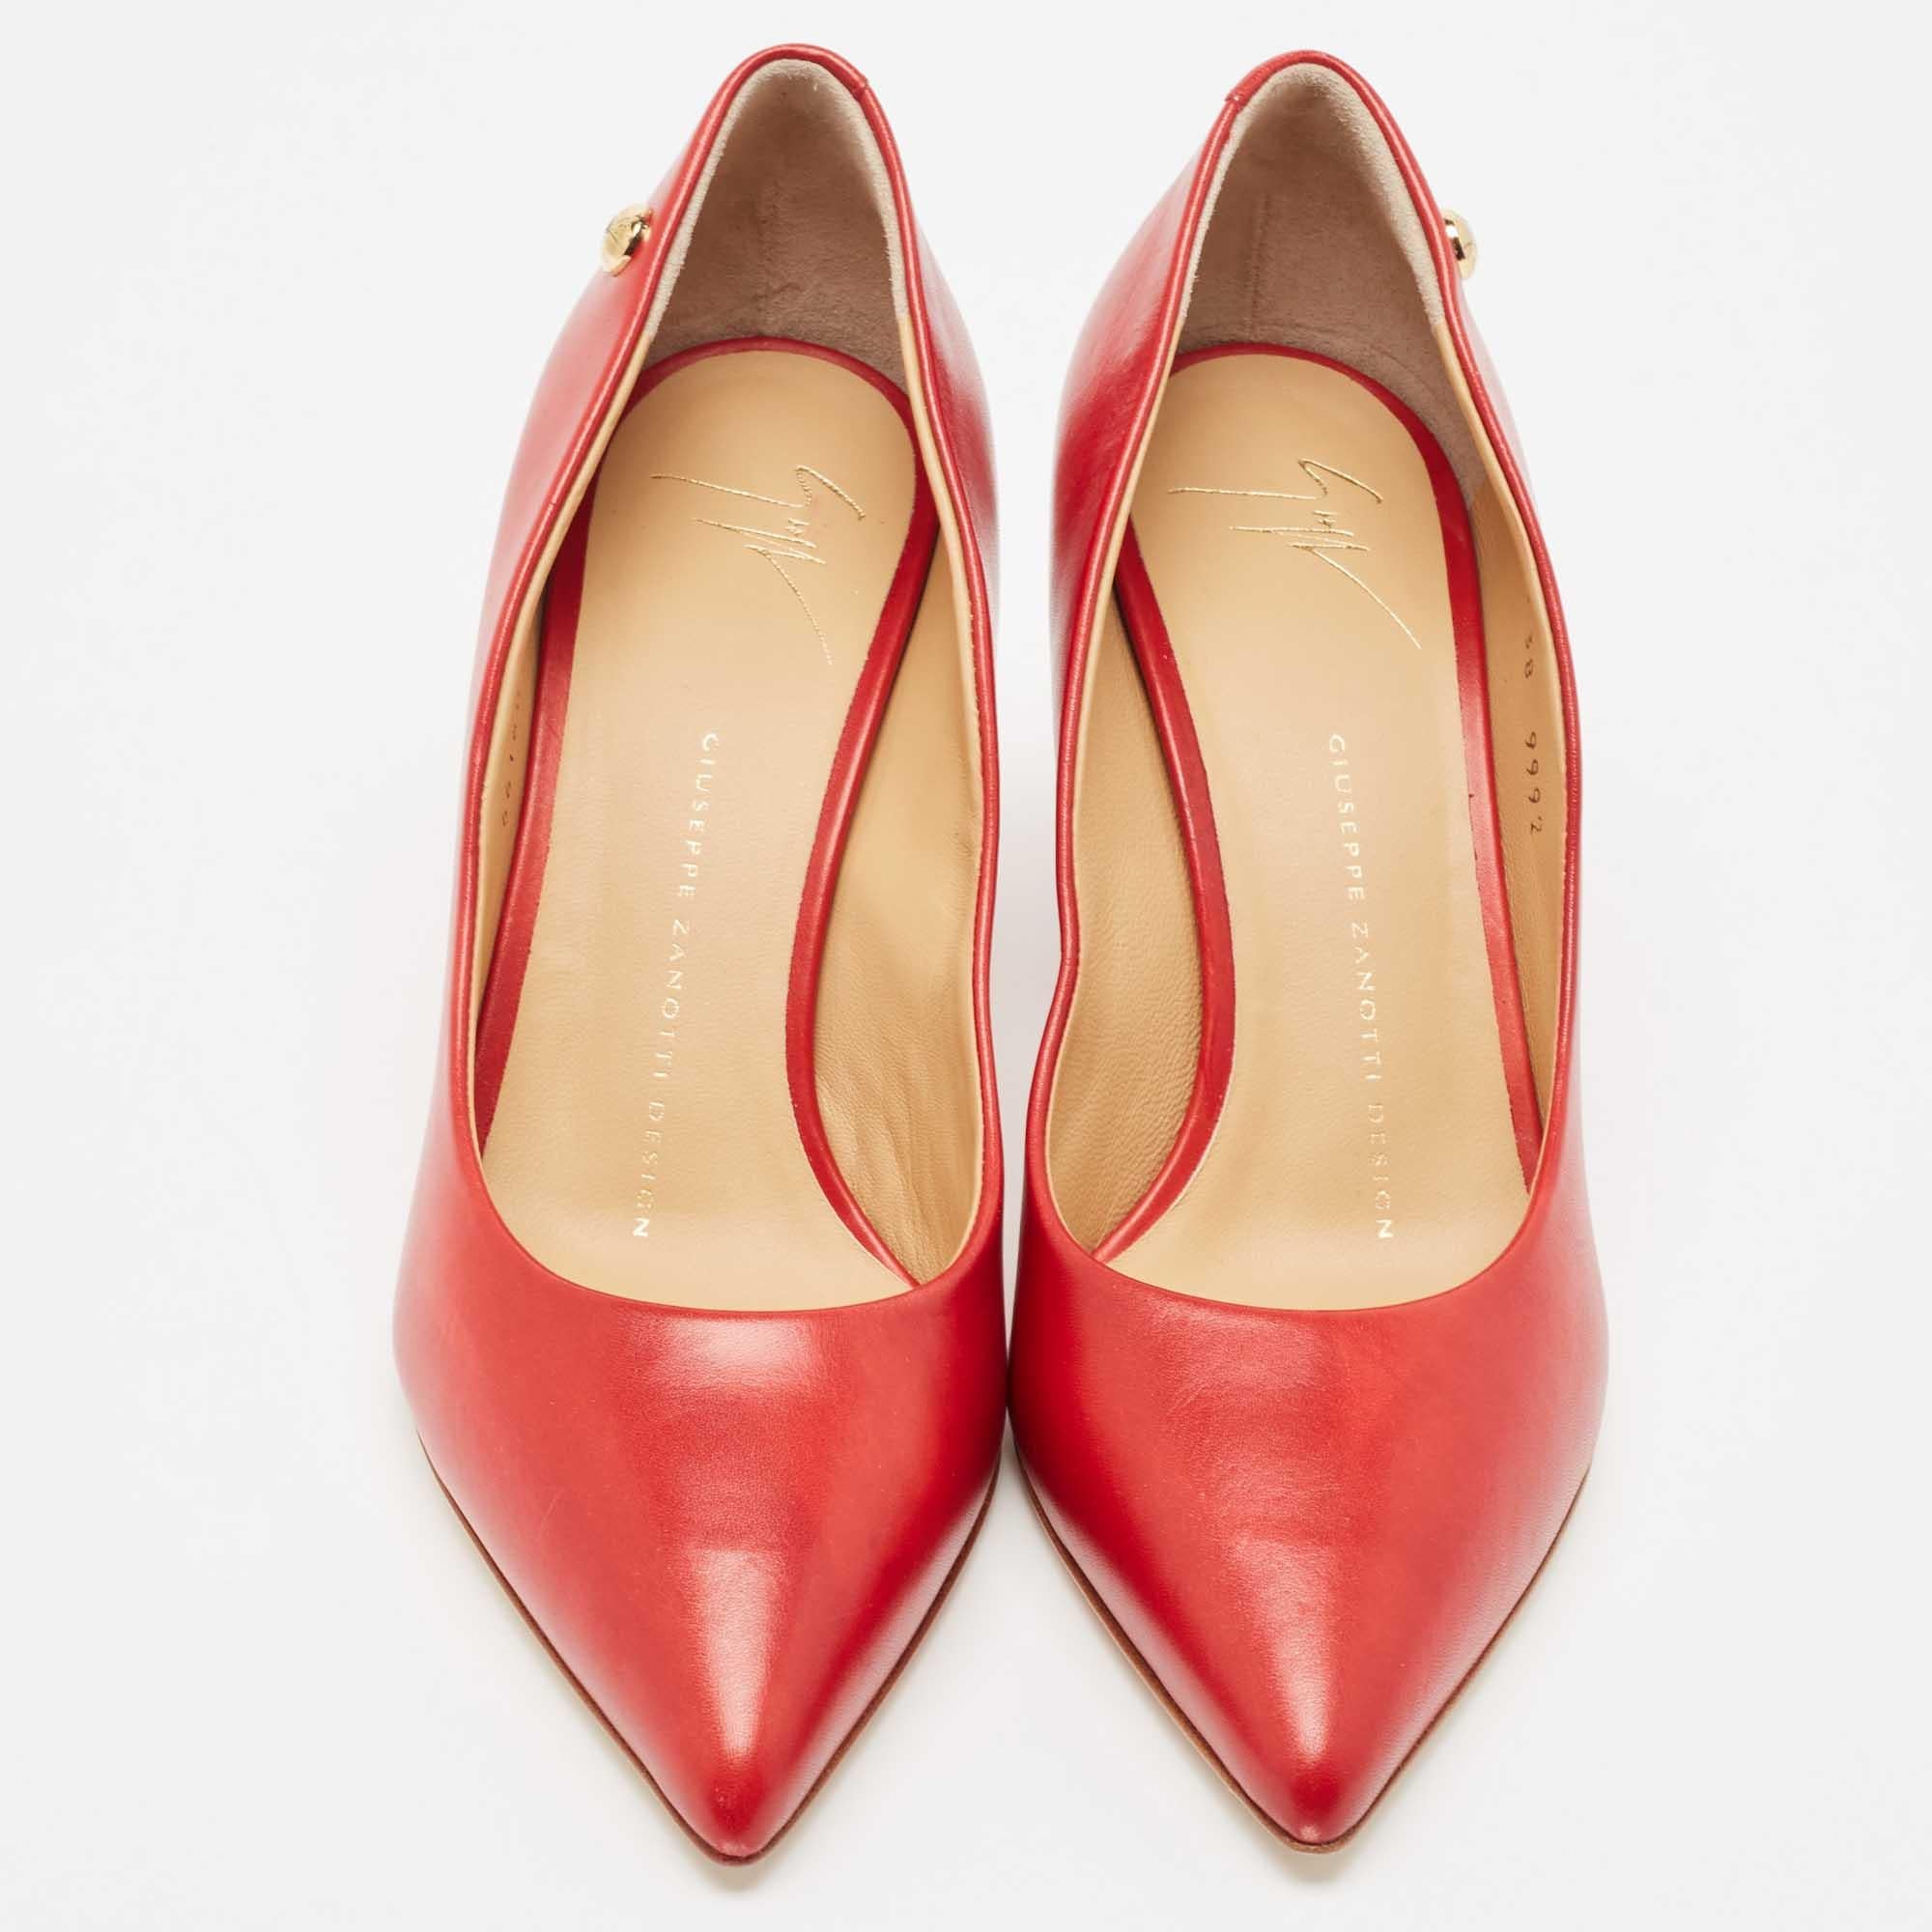 Make a statement with these Giuseppe Zanotti red pumps for women. Impeccably crafted, these chic heels offer both fashion and comfort, elevating your look with each graceful step.

Includes: Original Dustbag, Original Box, Info Card